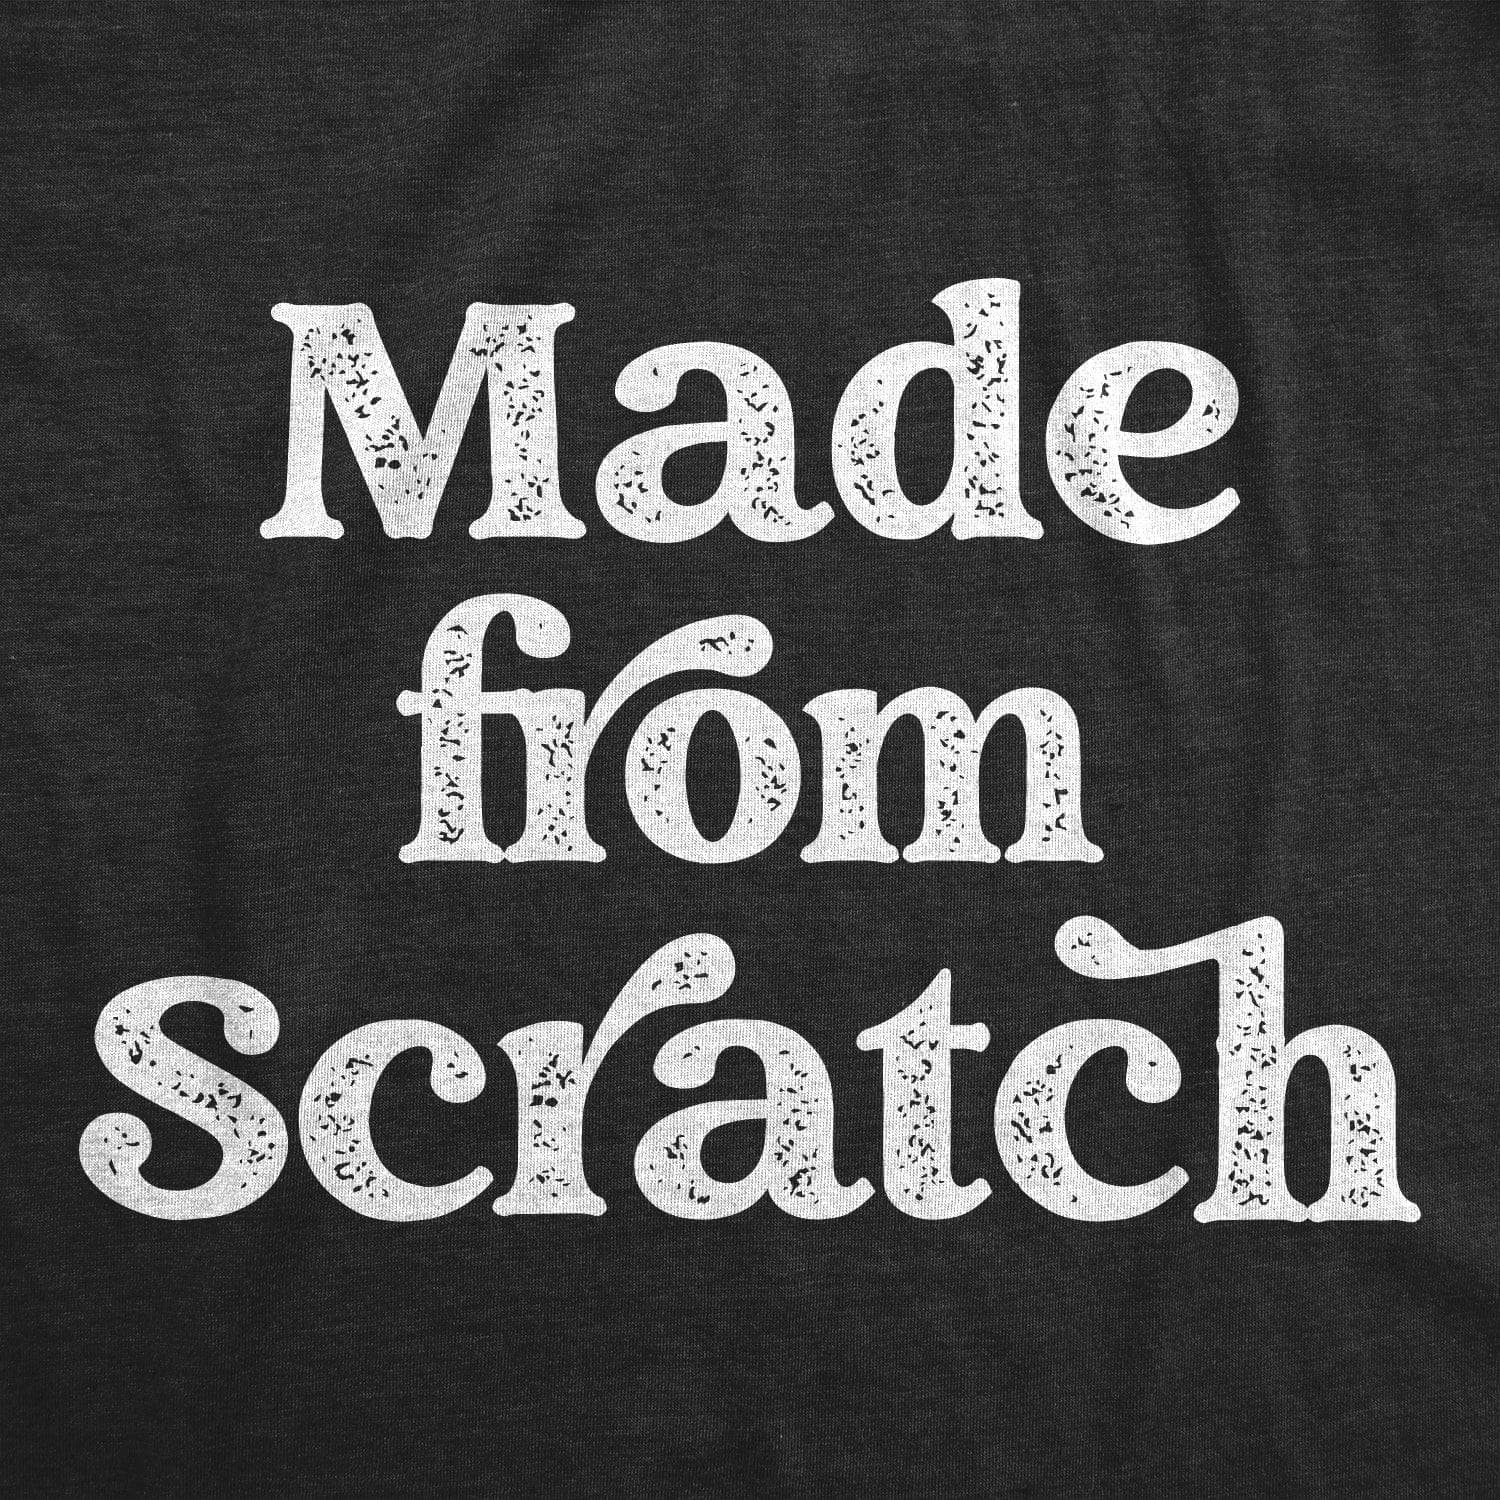 Made From Scratch Baby Bodysuit  -  Crazy Dog T-Shirts